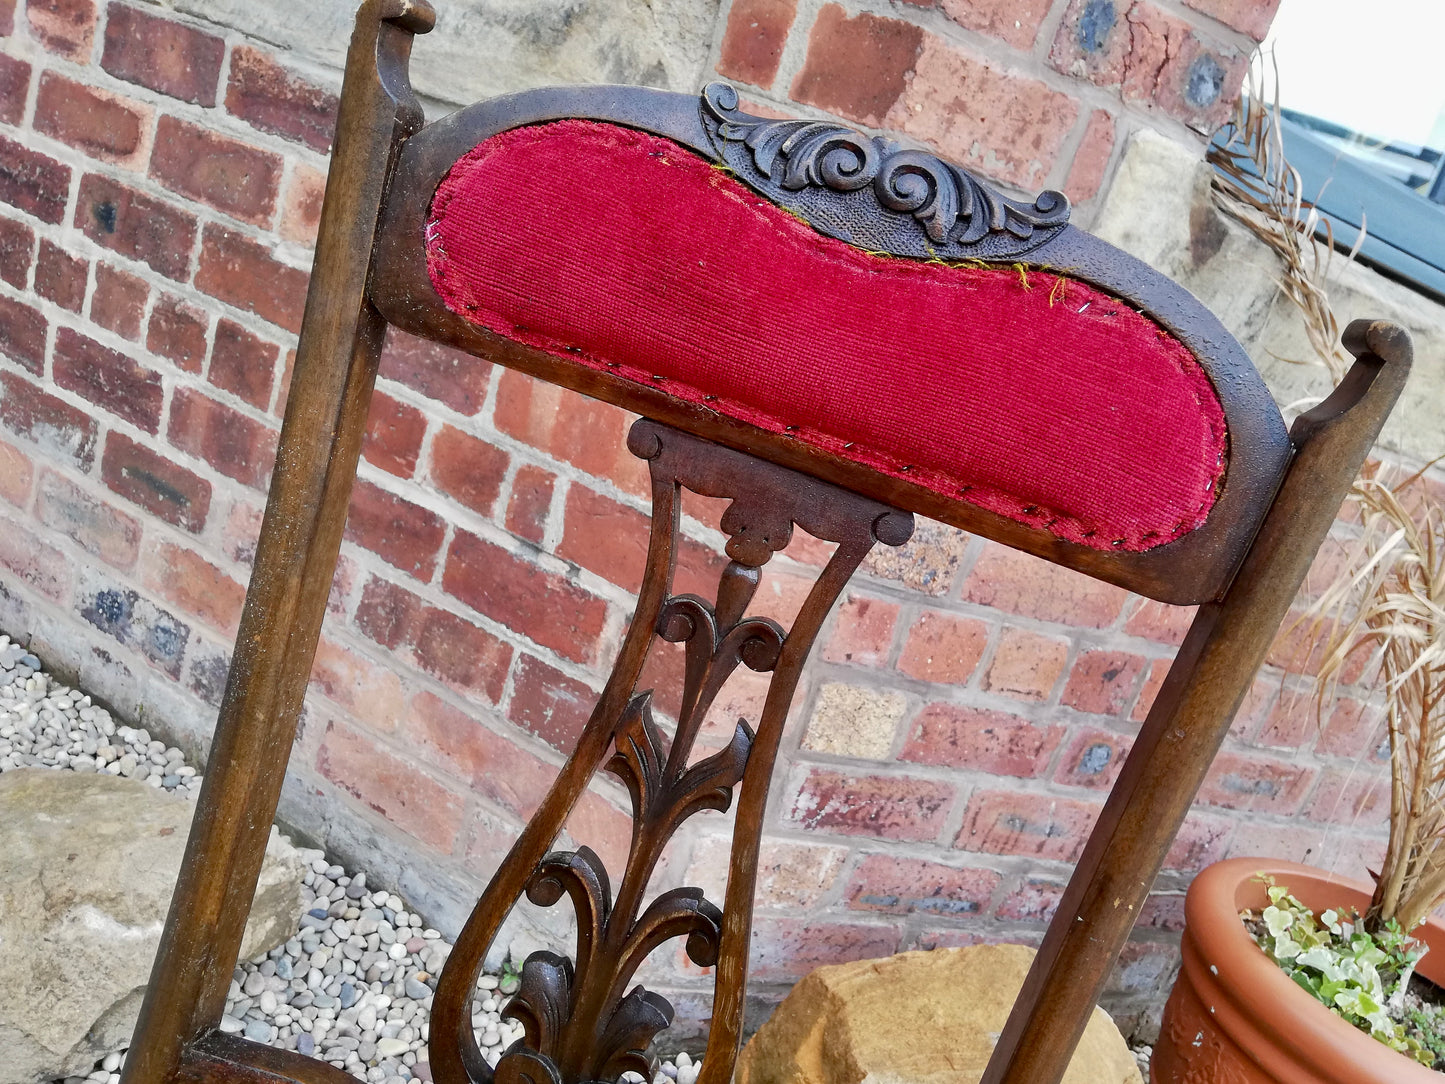 Antique vintage carved chair available for reupholstery and painting your choice of colour - price includes upholstery and painting